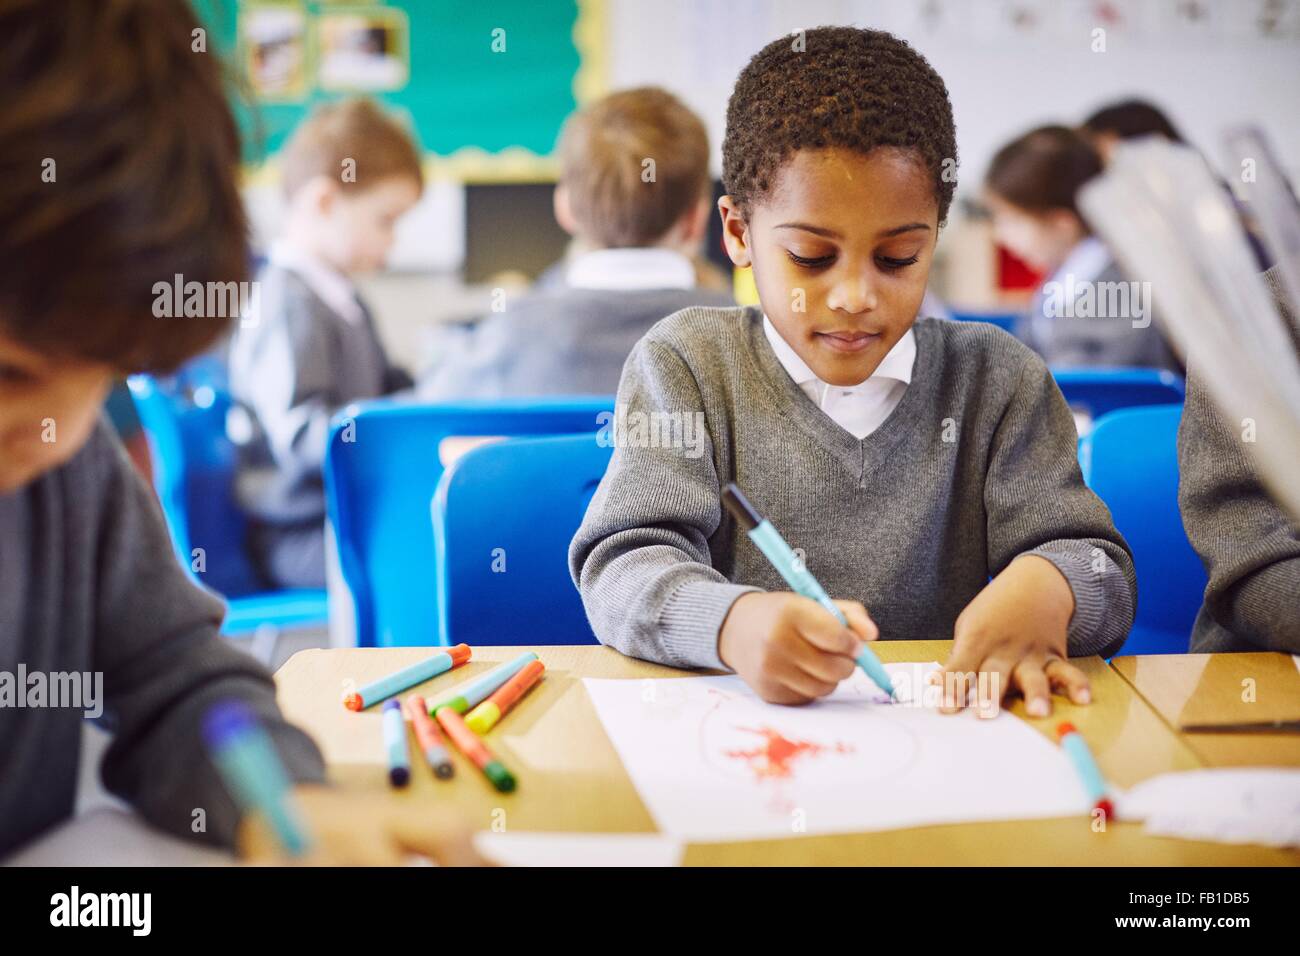 Boys drawing at desks in elementary school classroom Stock Photo